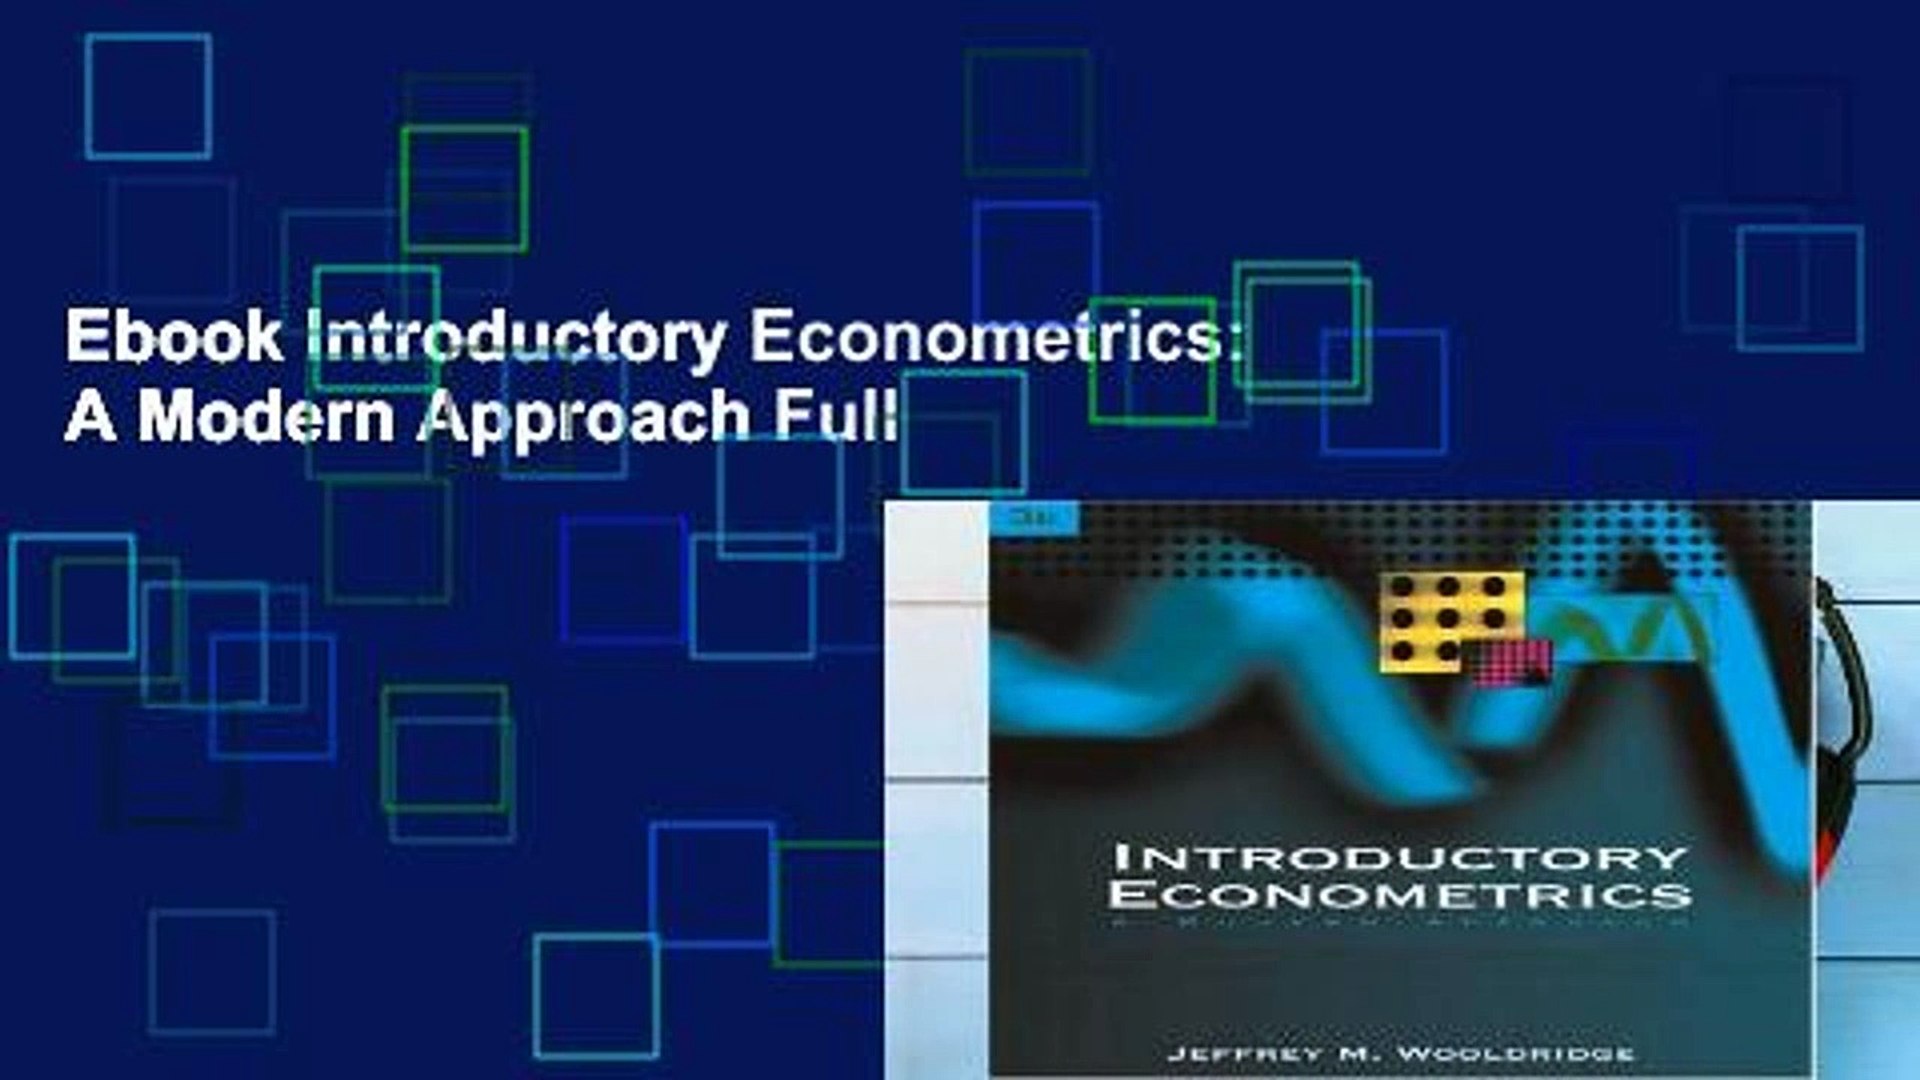 Ebook Introductory Econometrics A Modern Approach Full Video